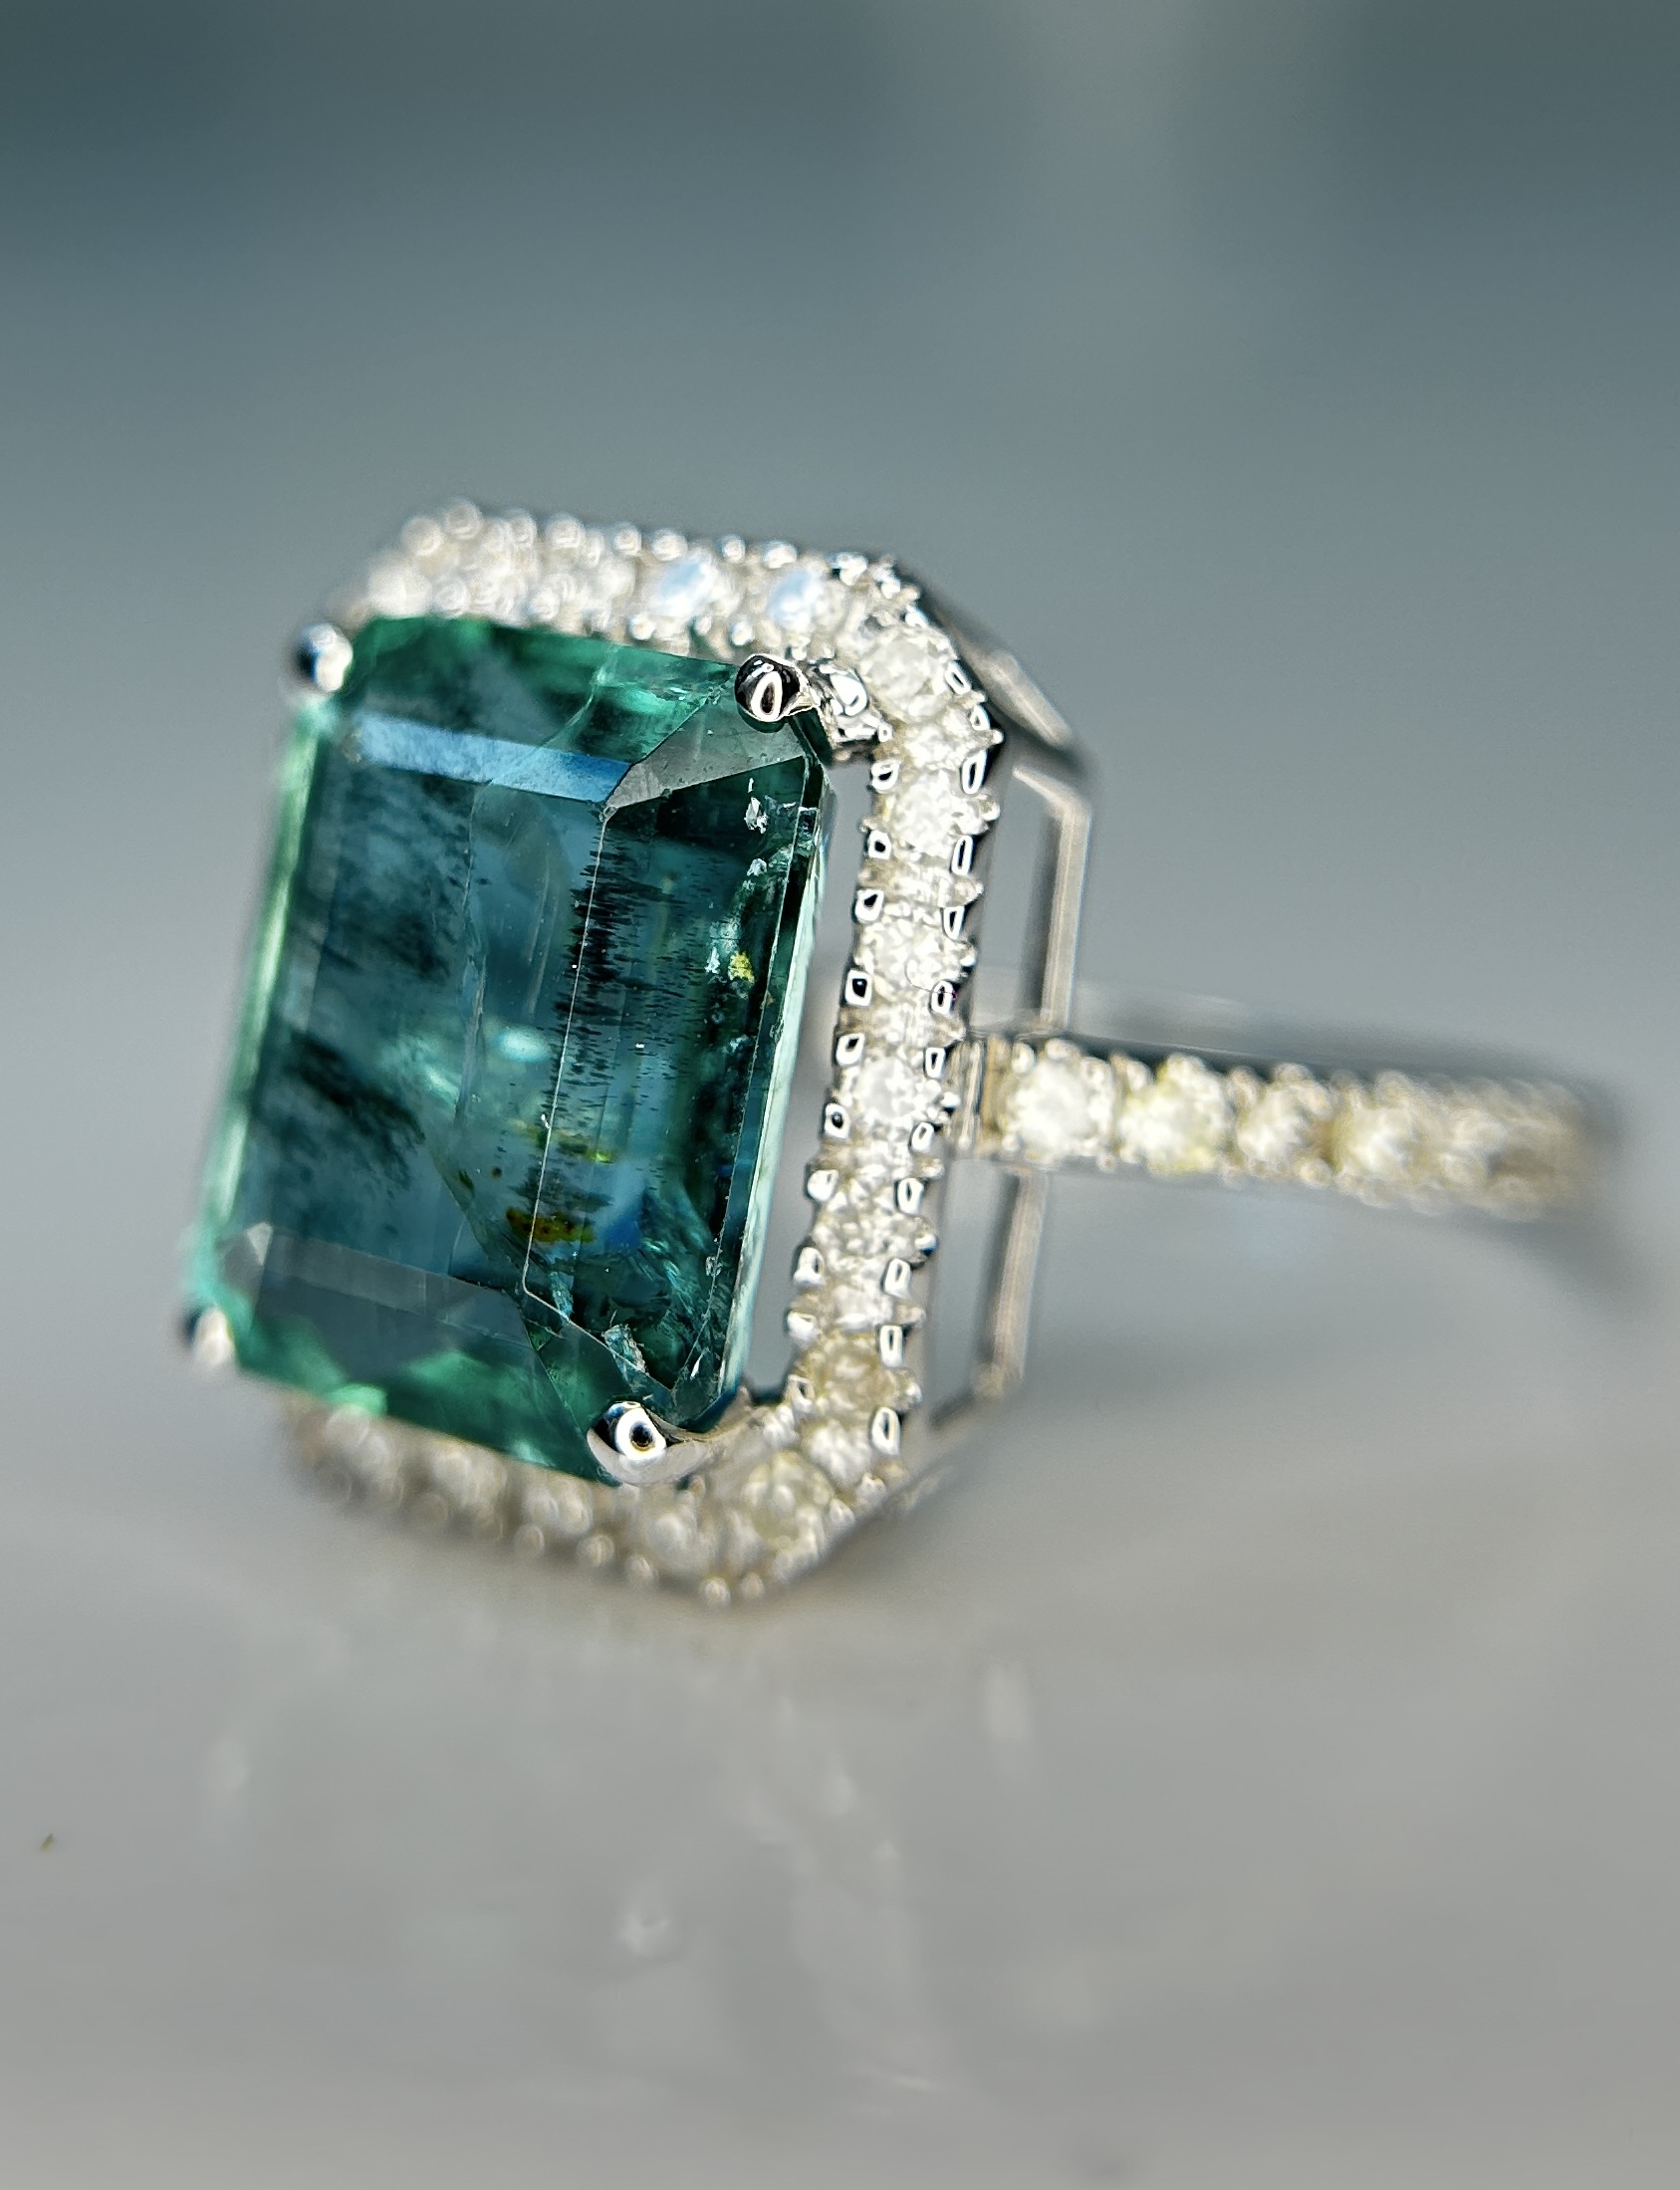 Beautiful Natural Emerald 4.27 CT With Natural Diamonds & 18kGold - Image 9 of 11